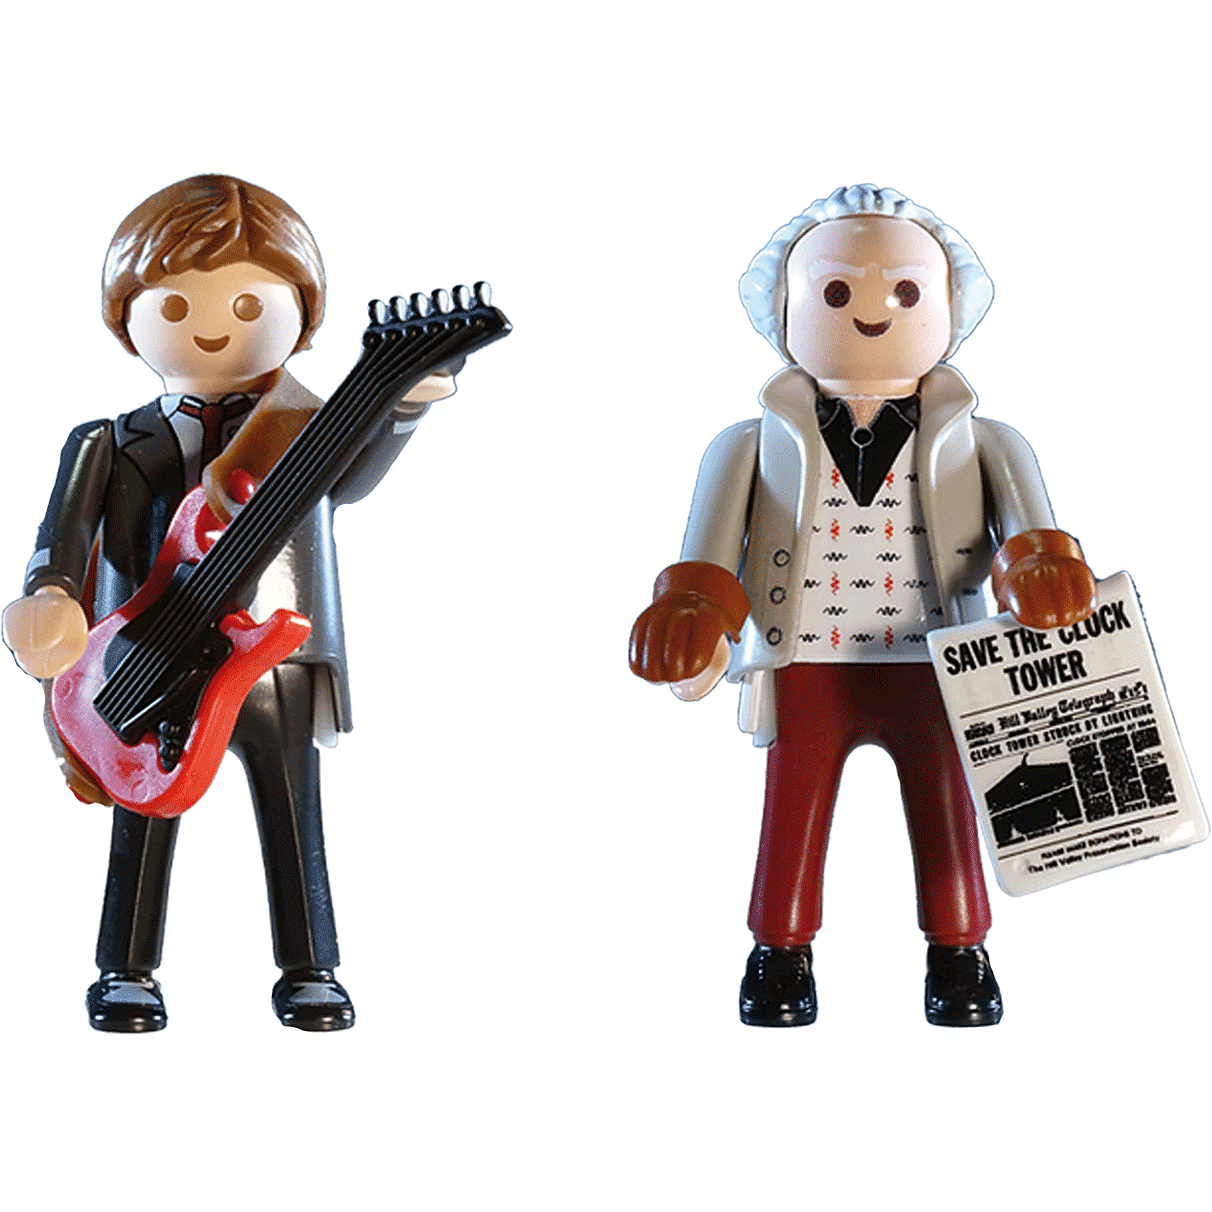 Back to the Future Playmobil Marty McFly & Dr. Emmett Brown "1955 Edition" 6-piece vinyl figures 2-pack Vinyl Toy Playmobil